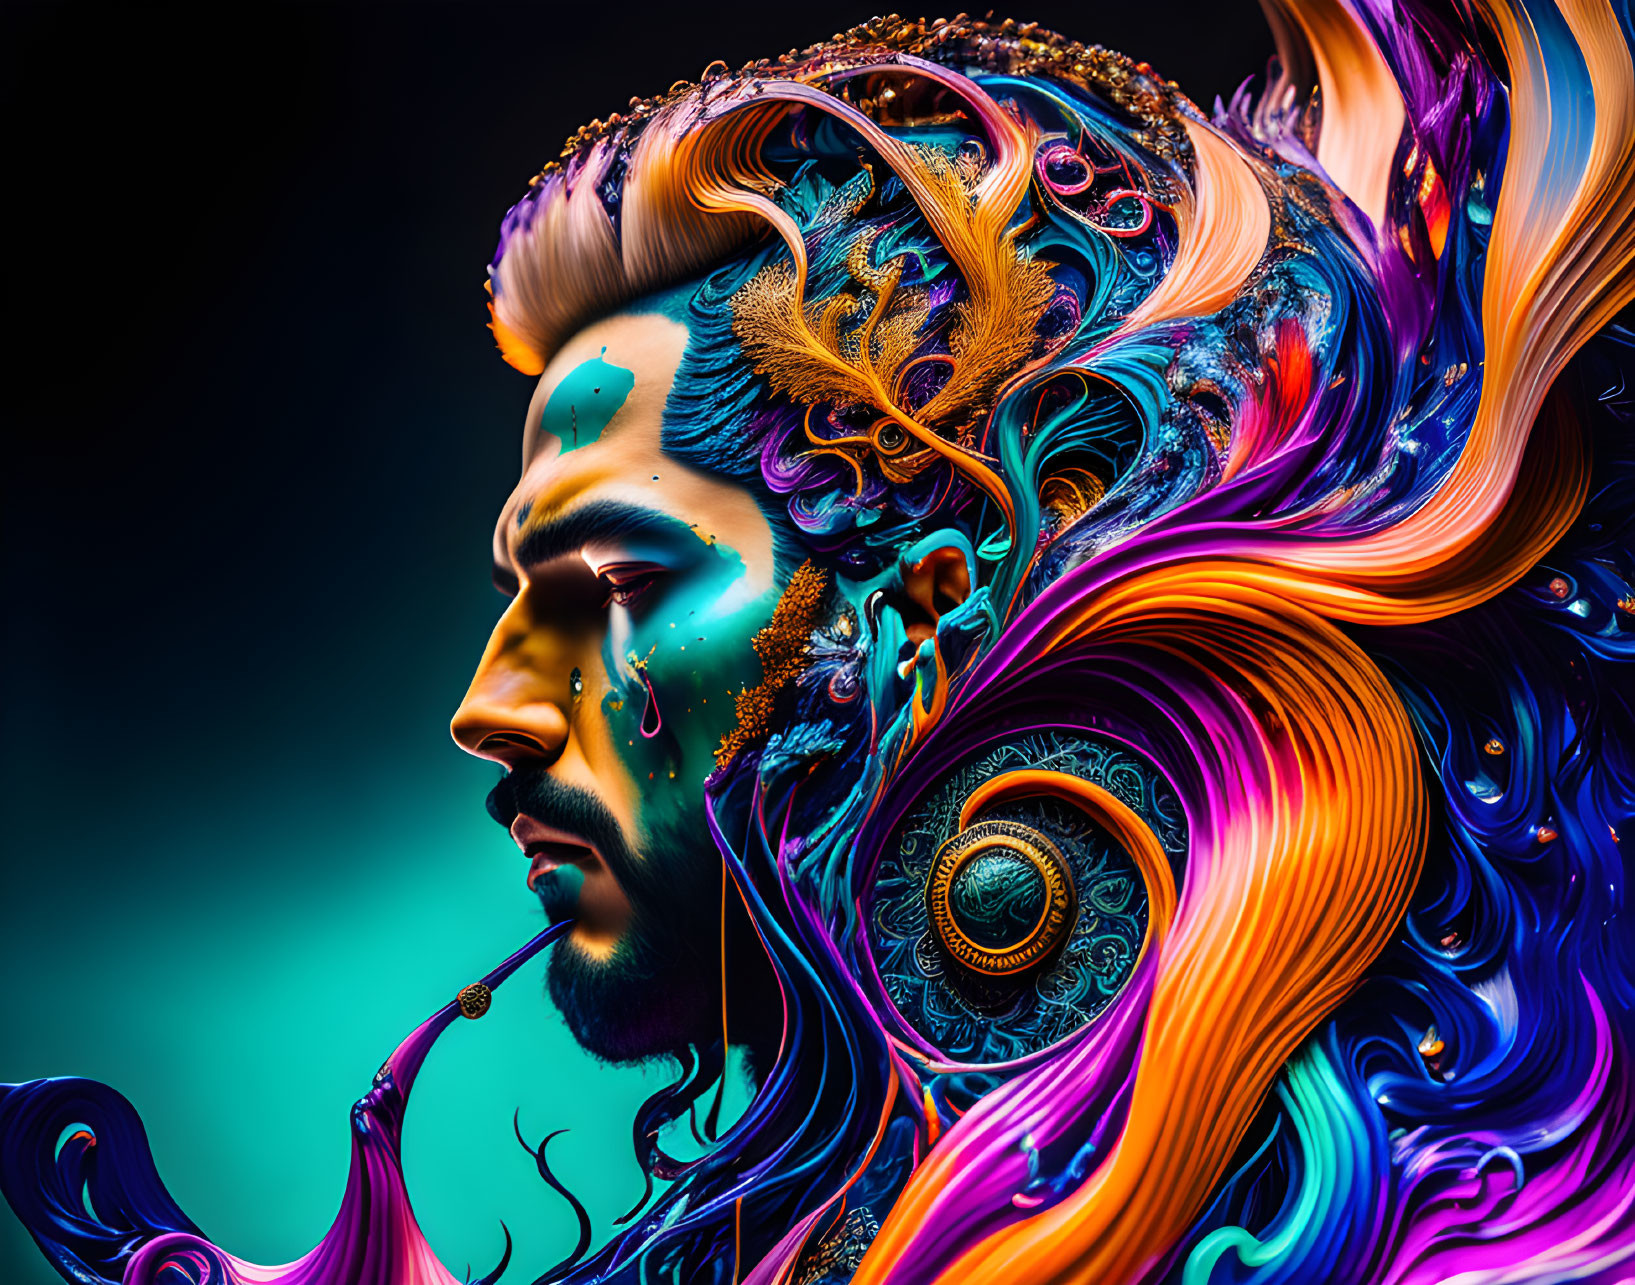 Colorful digital artwork: Man with swirling patterns merging with face and beard